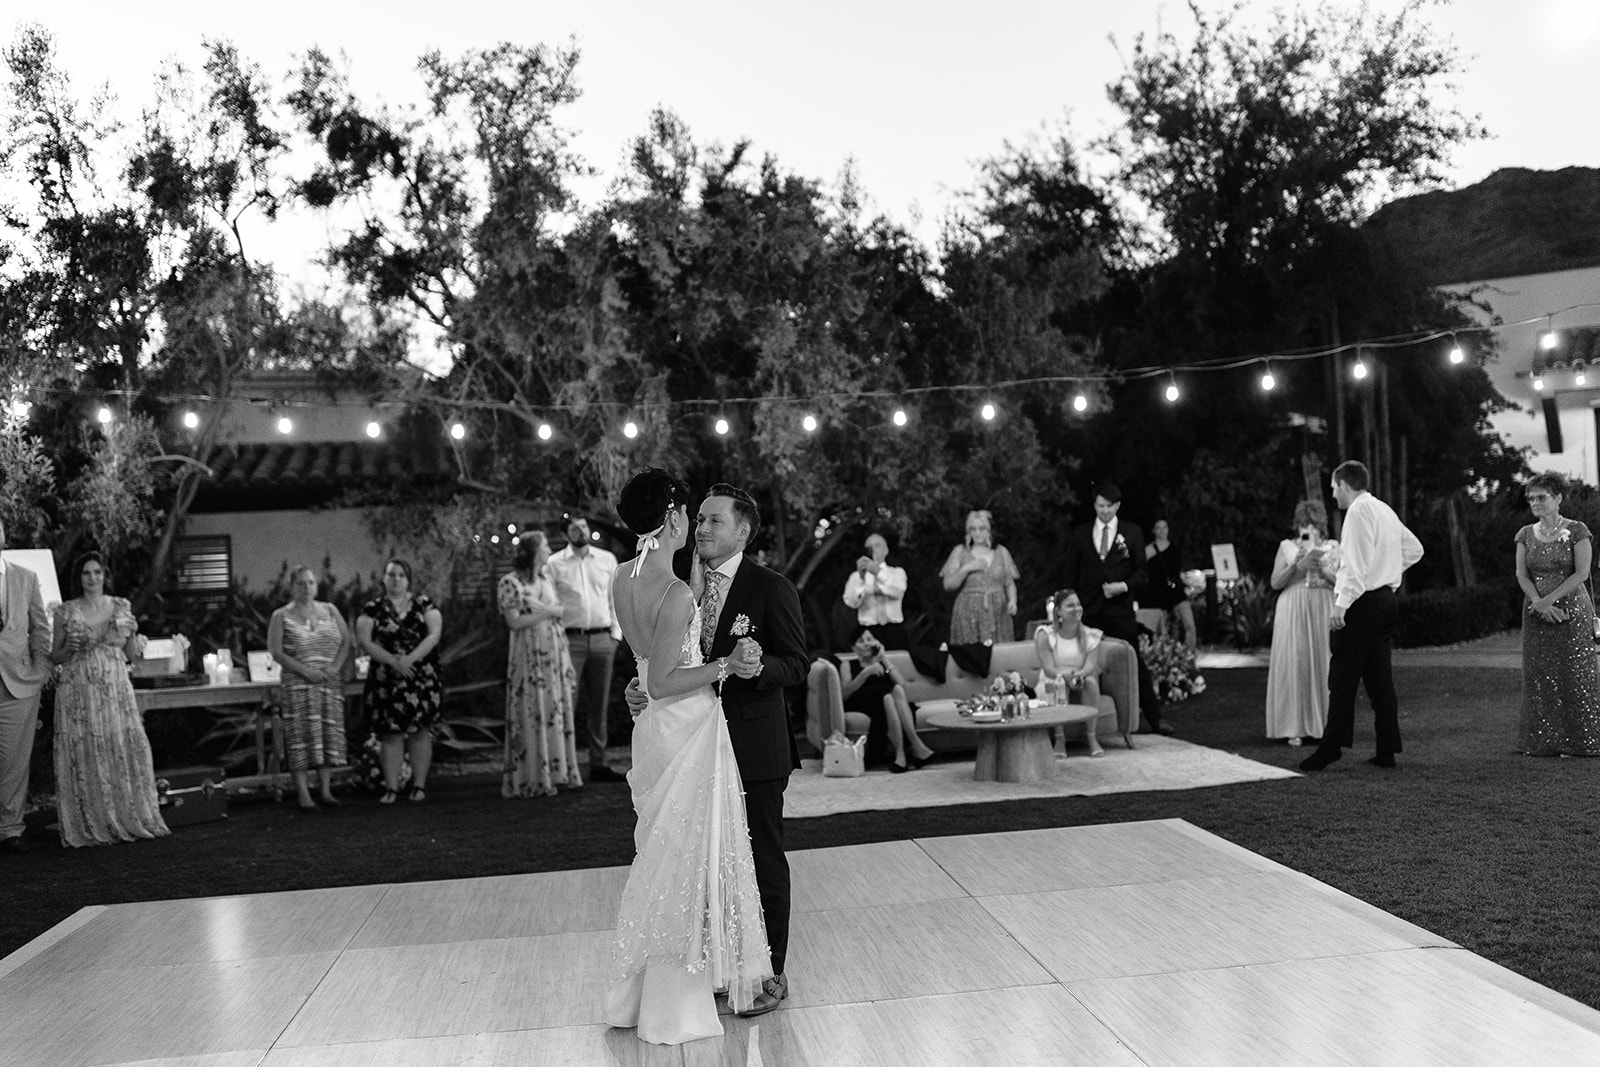 A bride and groom share a dance on an outdoor dance floor at a garden reception under string lights, with guests watching.